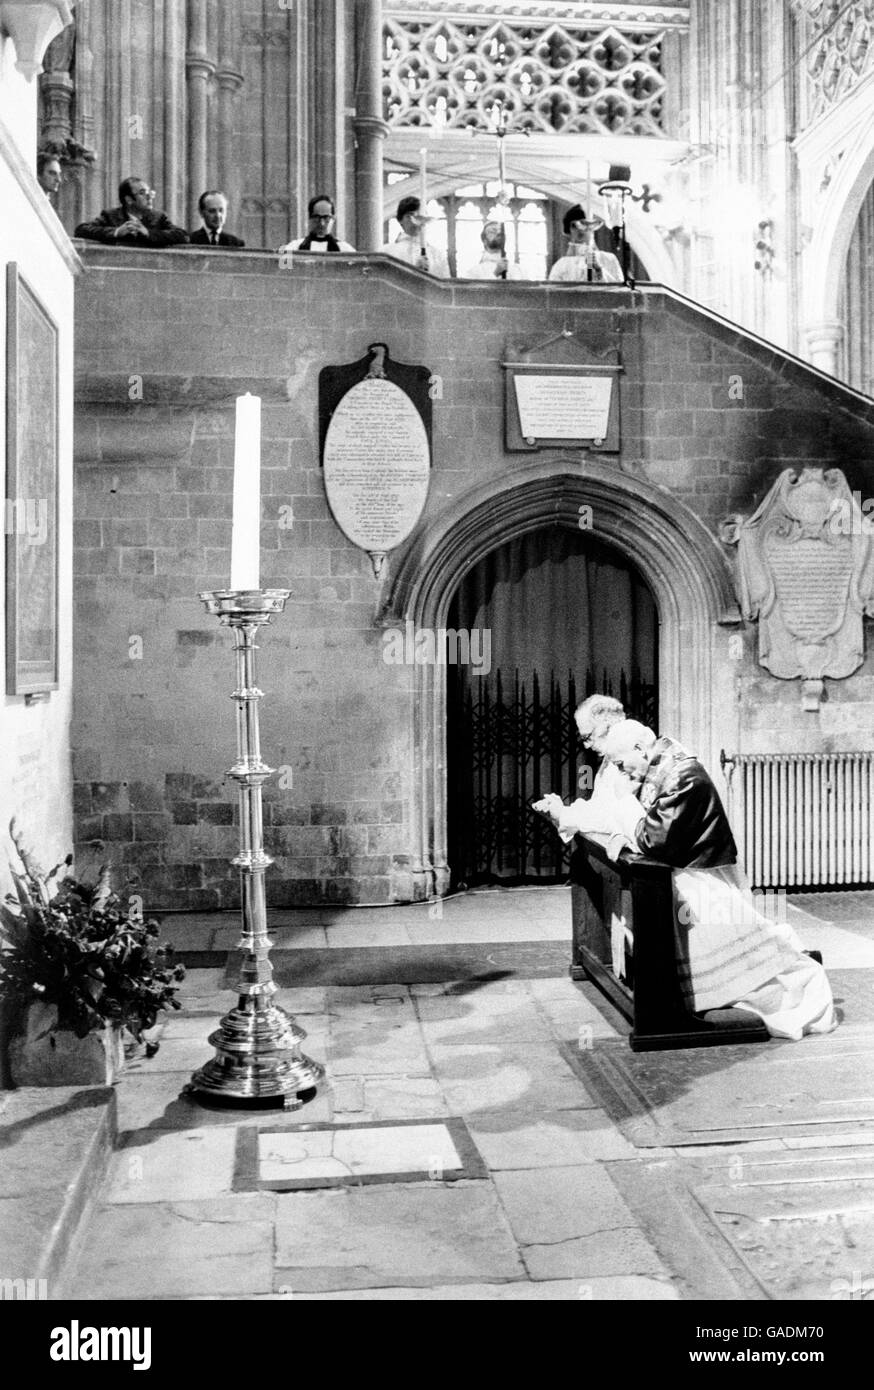 Pope John Paul II and Archbishop of Canterbury, Dr. Robert Runcie, kneel together in Canterbury Cathedral where Thomas a'Beckett was murdered on the instruction of Henry II in 1170. Thomas, saint and martyr, was an Archbishop of Canterbury, his shrine has become a place of pilgrimage. Stock Photo